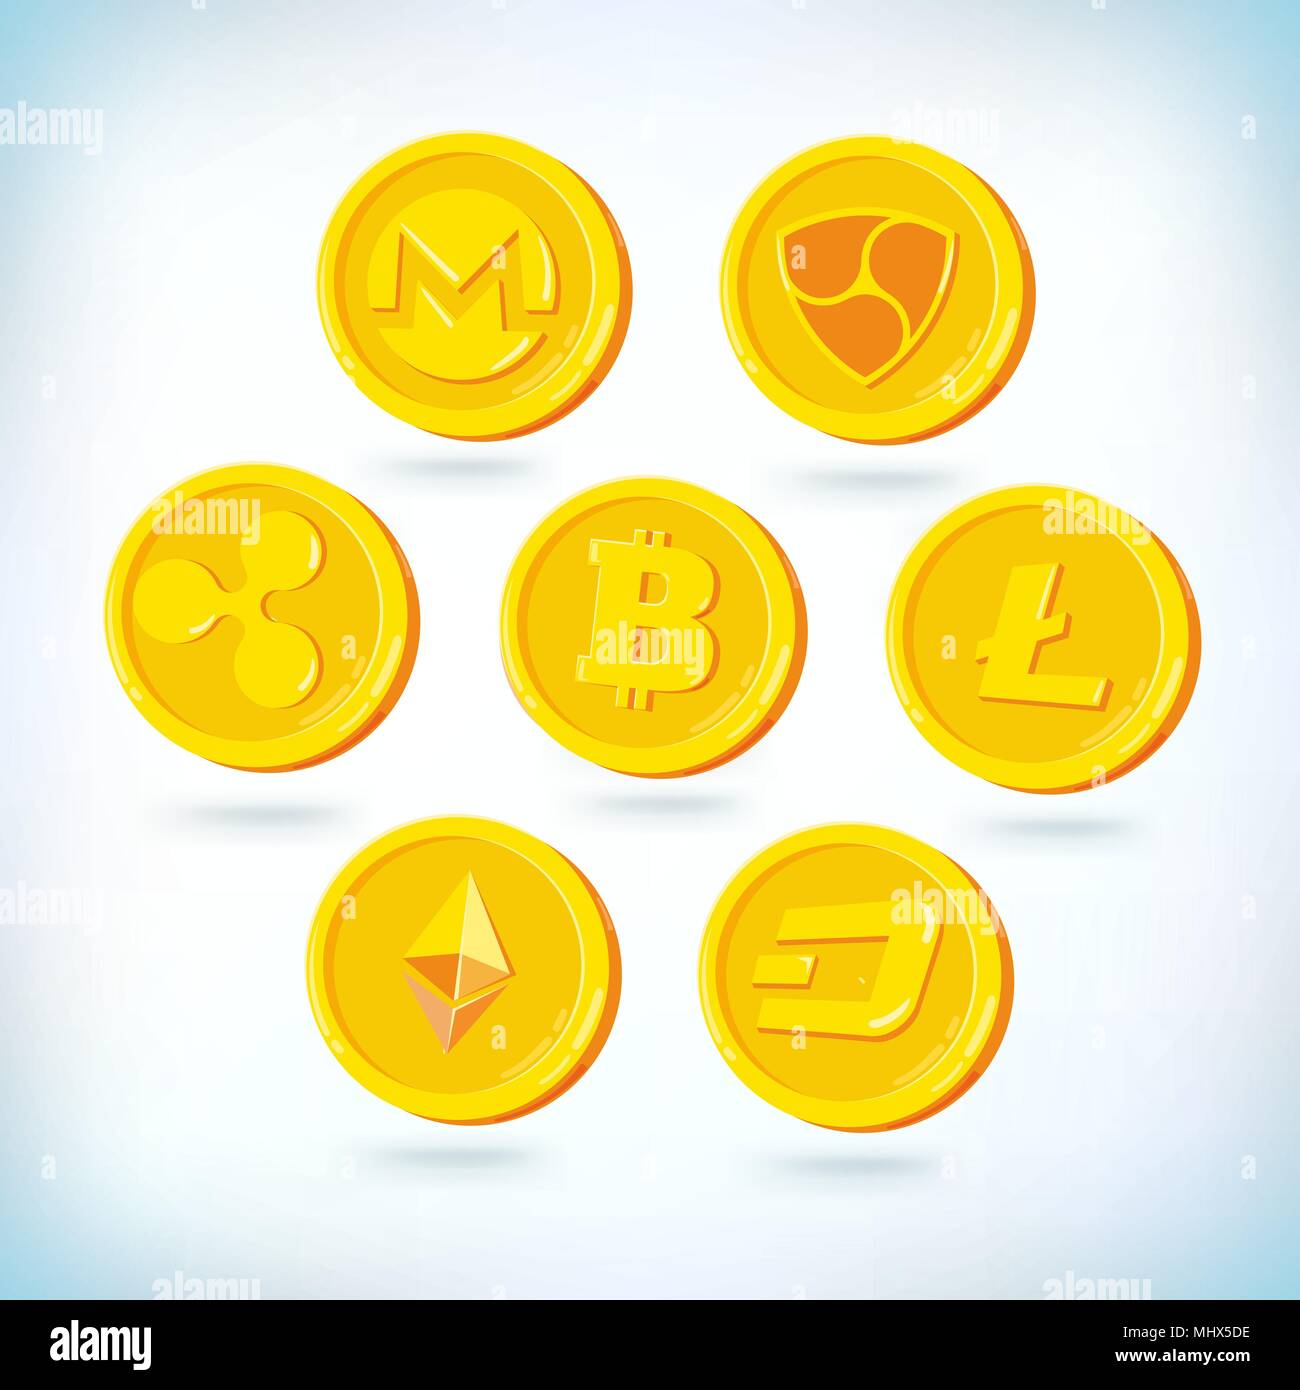 Cryptocurrency icons set. Cryptography currency. Bitcoin, Dash, Ethereum, litecoin, monero, nem, ripple golden coins. Financial technology. Digital currency. 2D cartoon bit coin isolated white background. Blockchain for internet money. Stock Vector